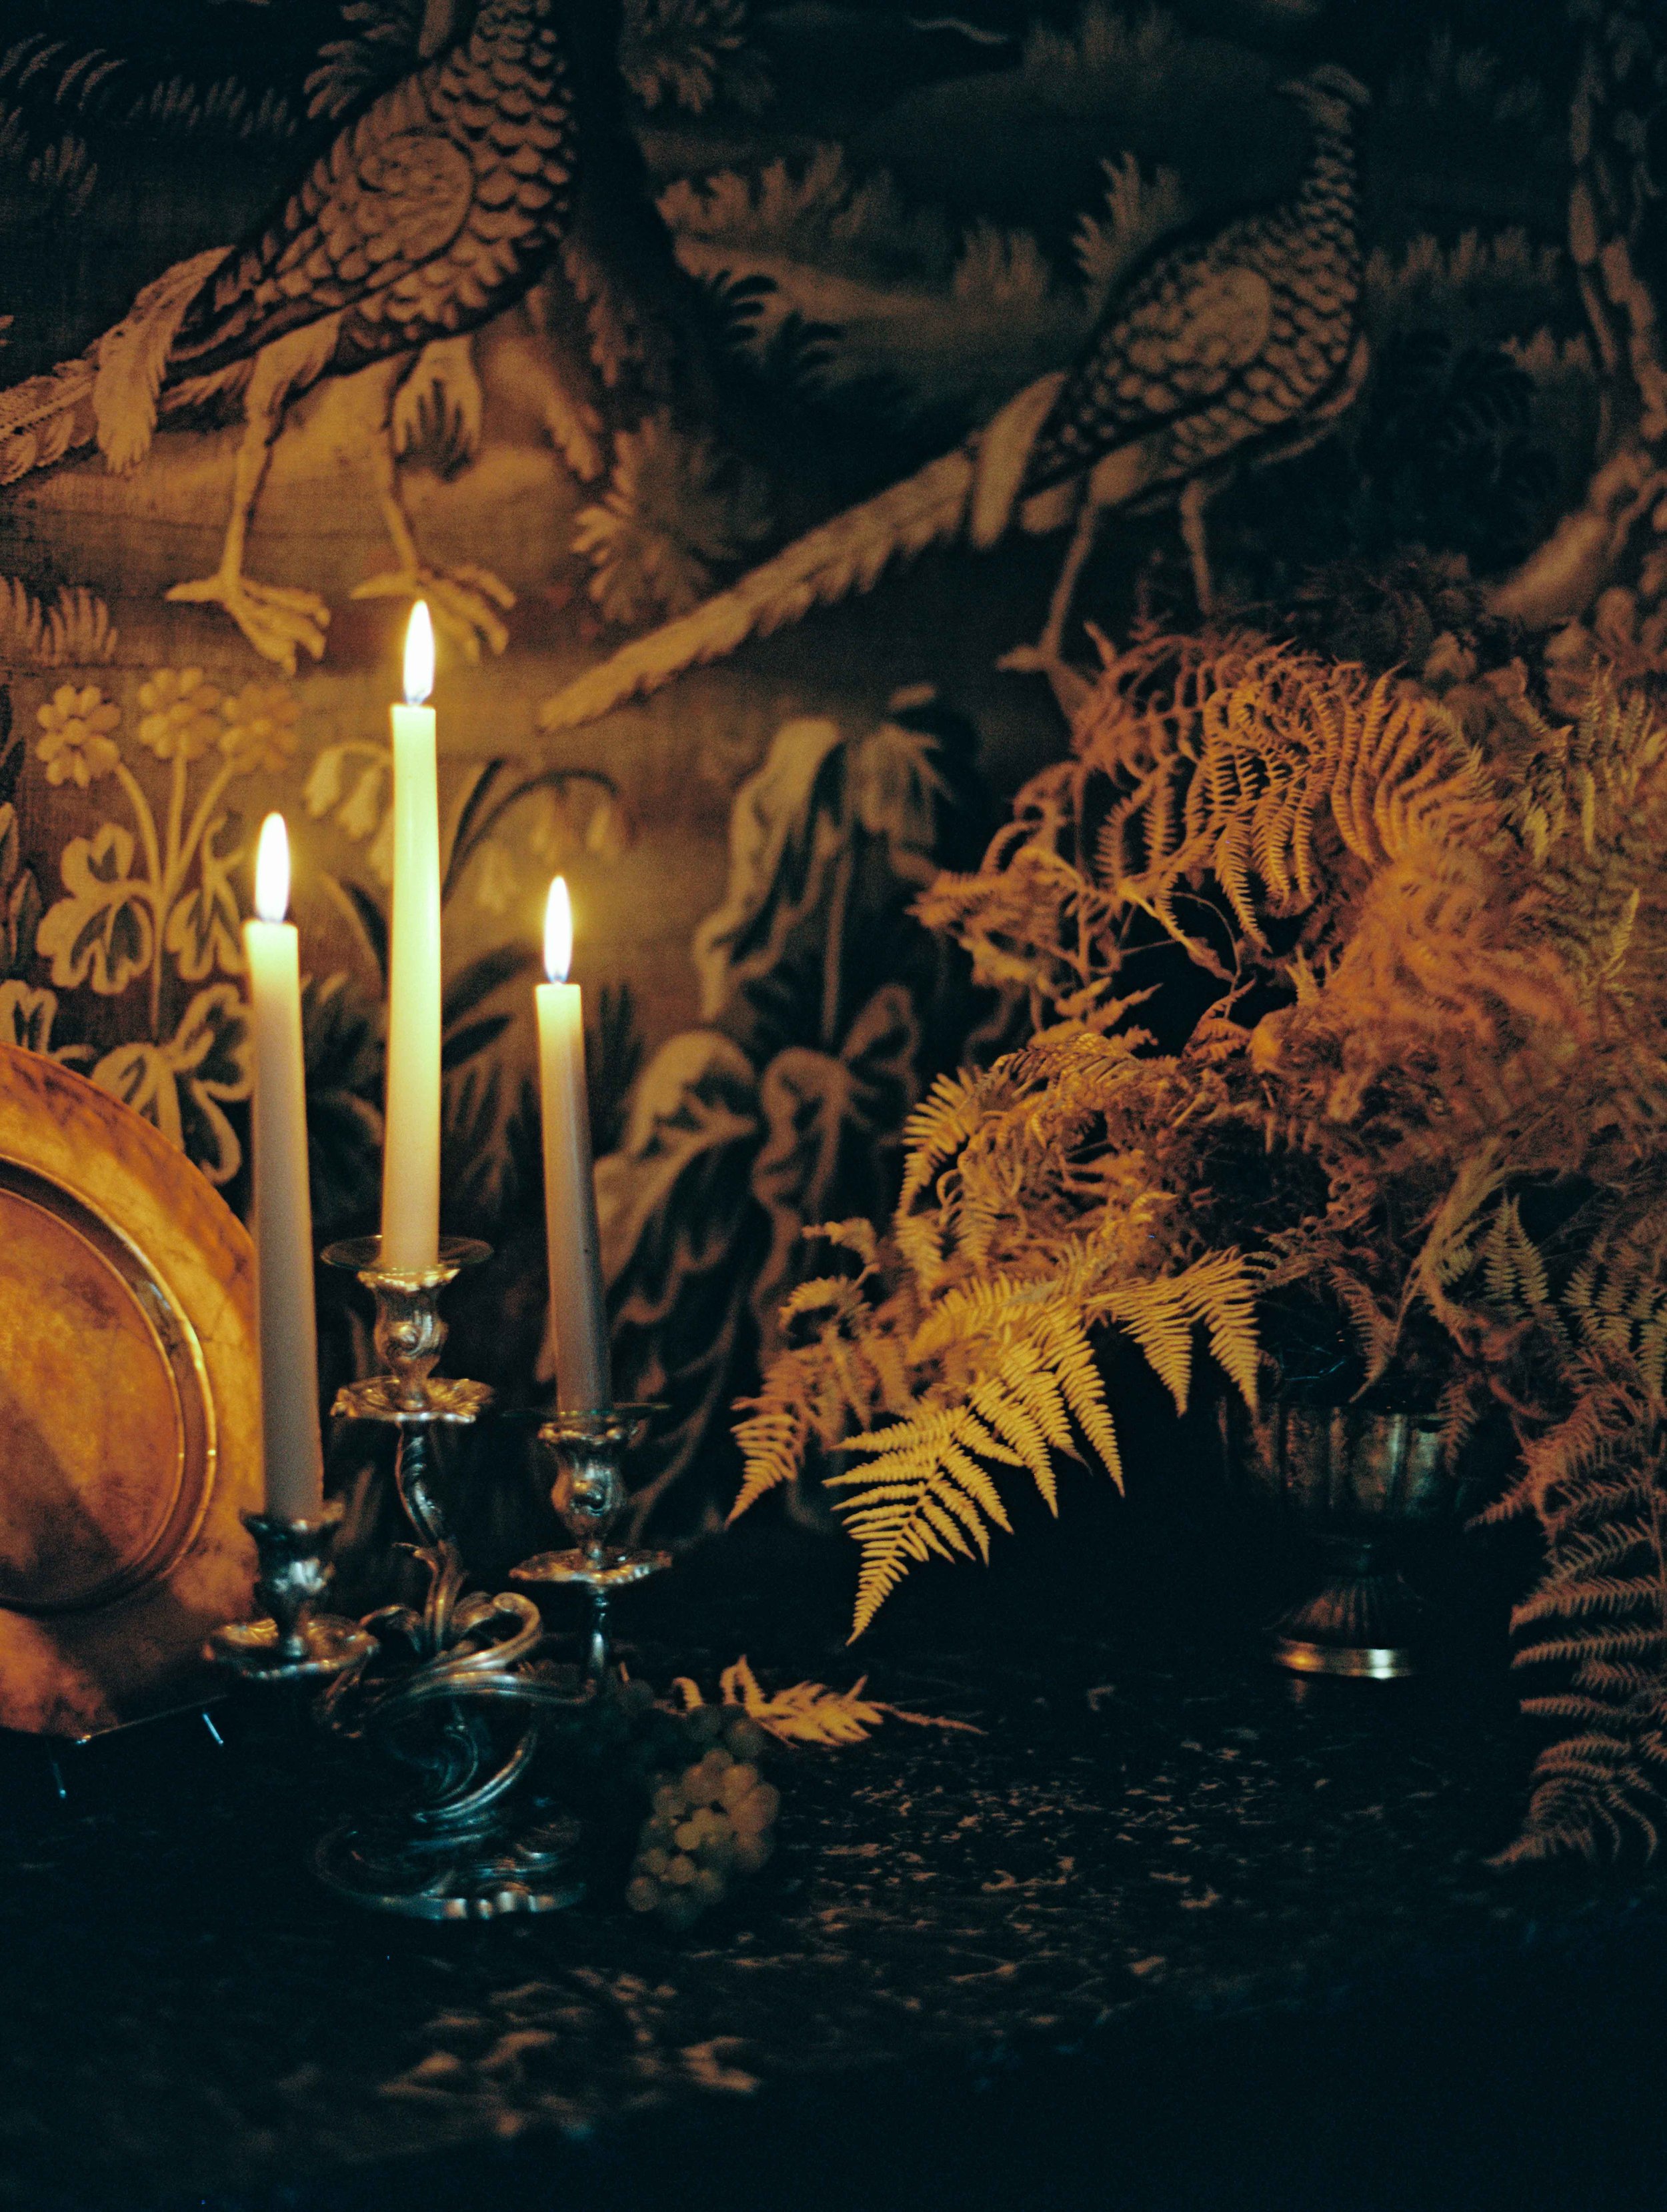 Candles in a candelabra light up the ornate wallpaper decorated with ferns and peacocks at the chateau.